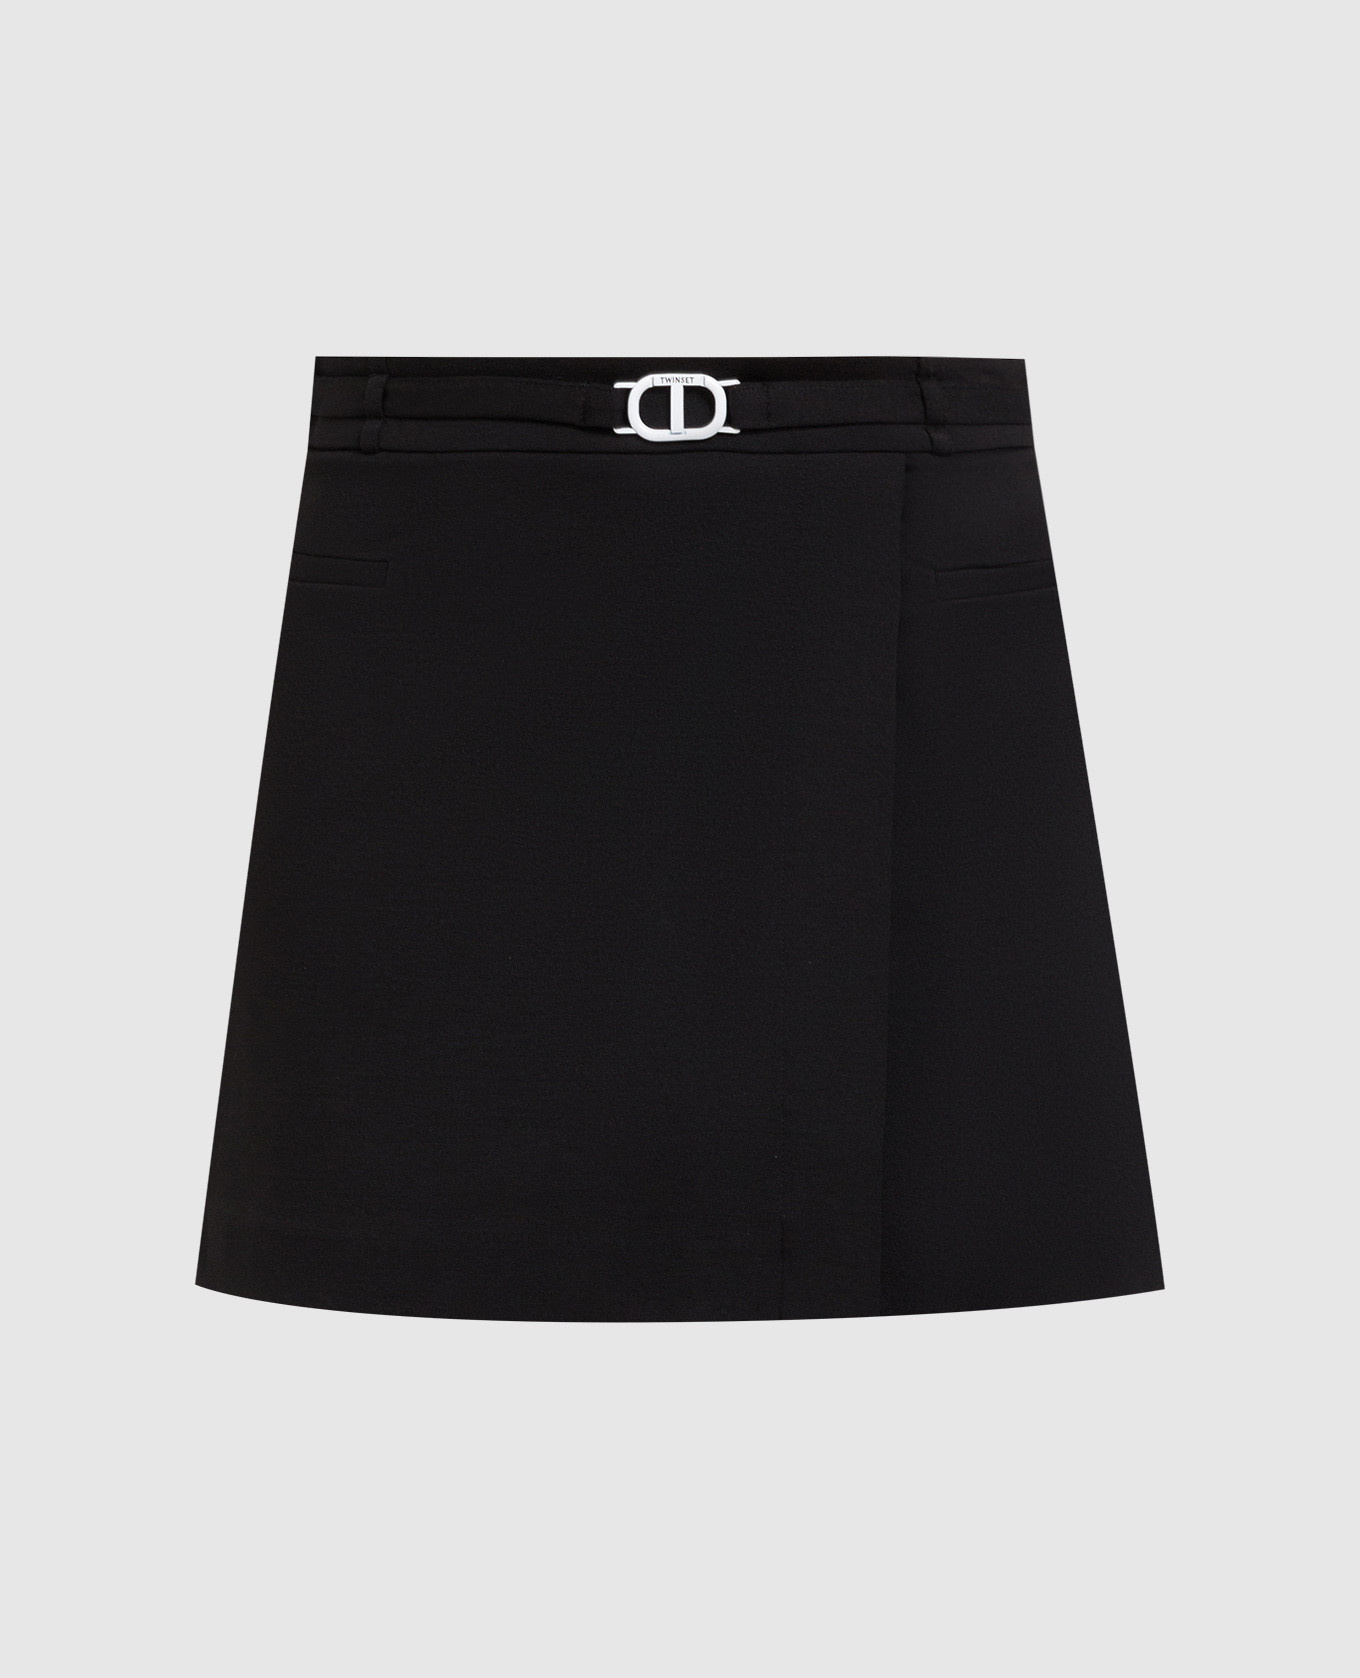 Black mini skirt with contrasting Oval T logo